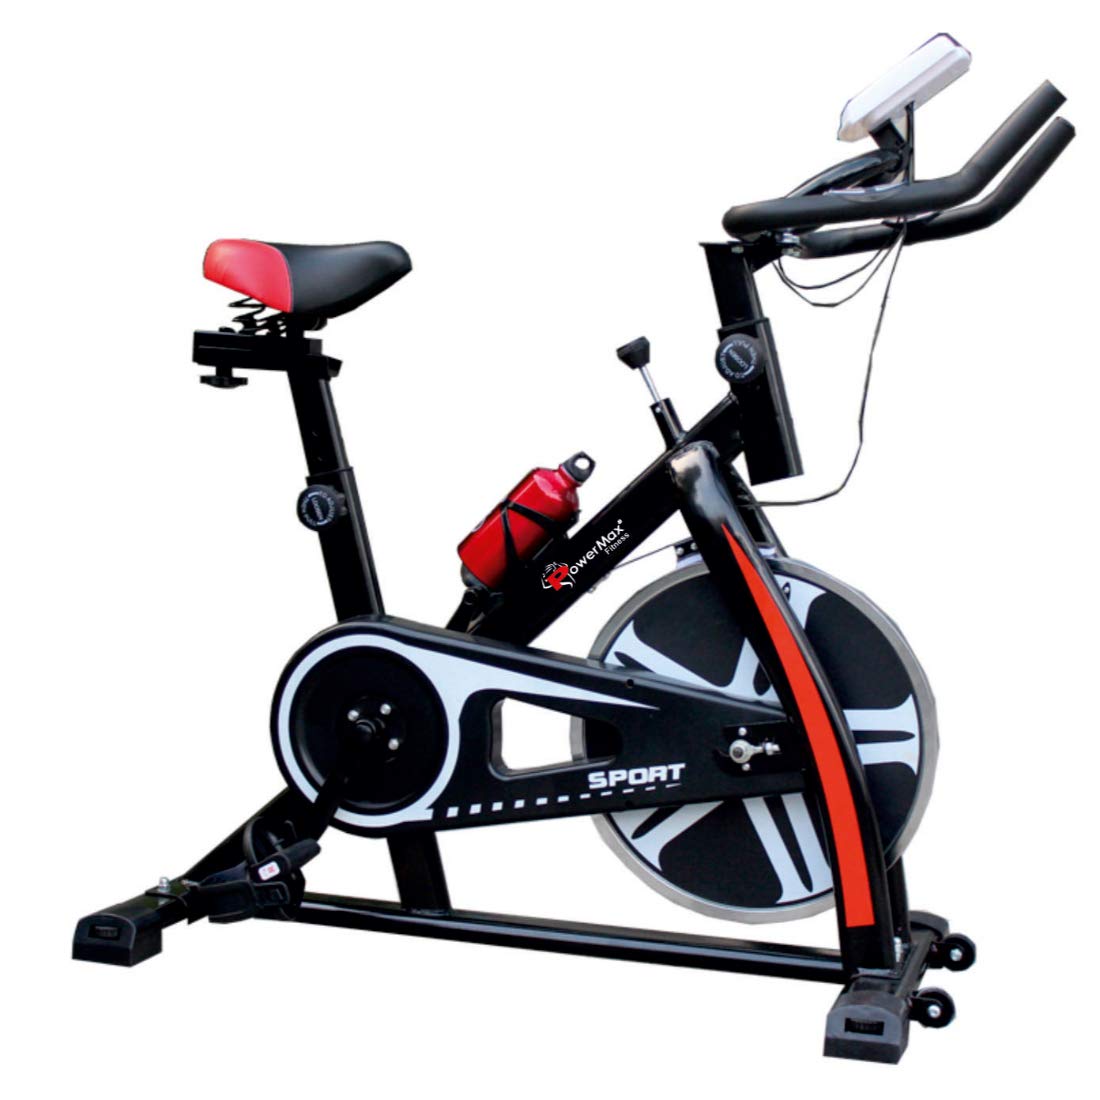 exercise fitness equipment for physical activity